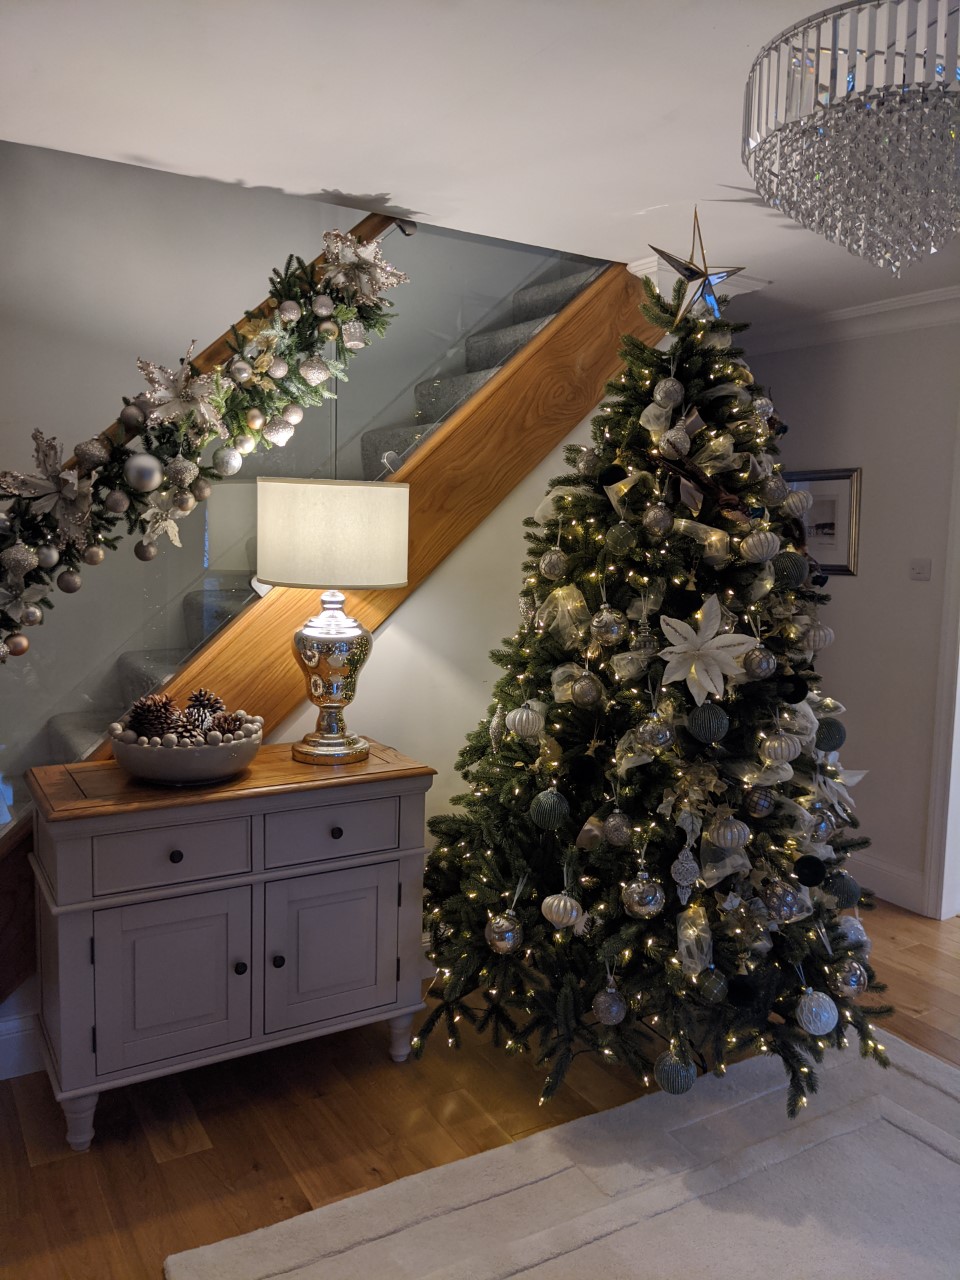 How to decorate your staircase for Christmas